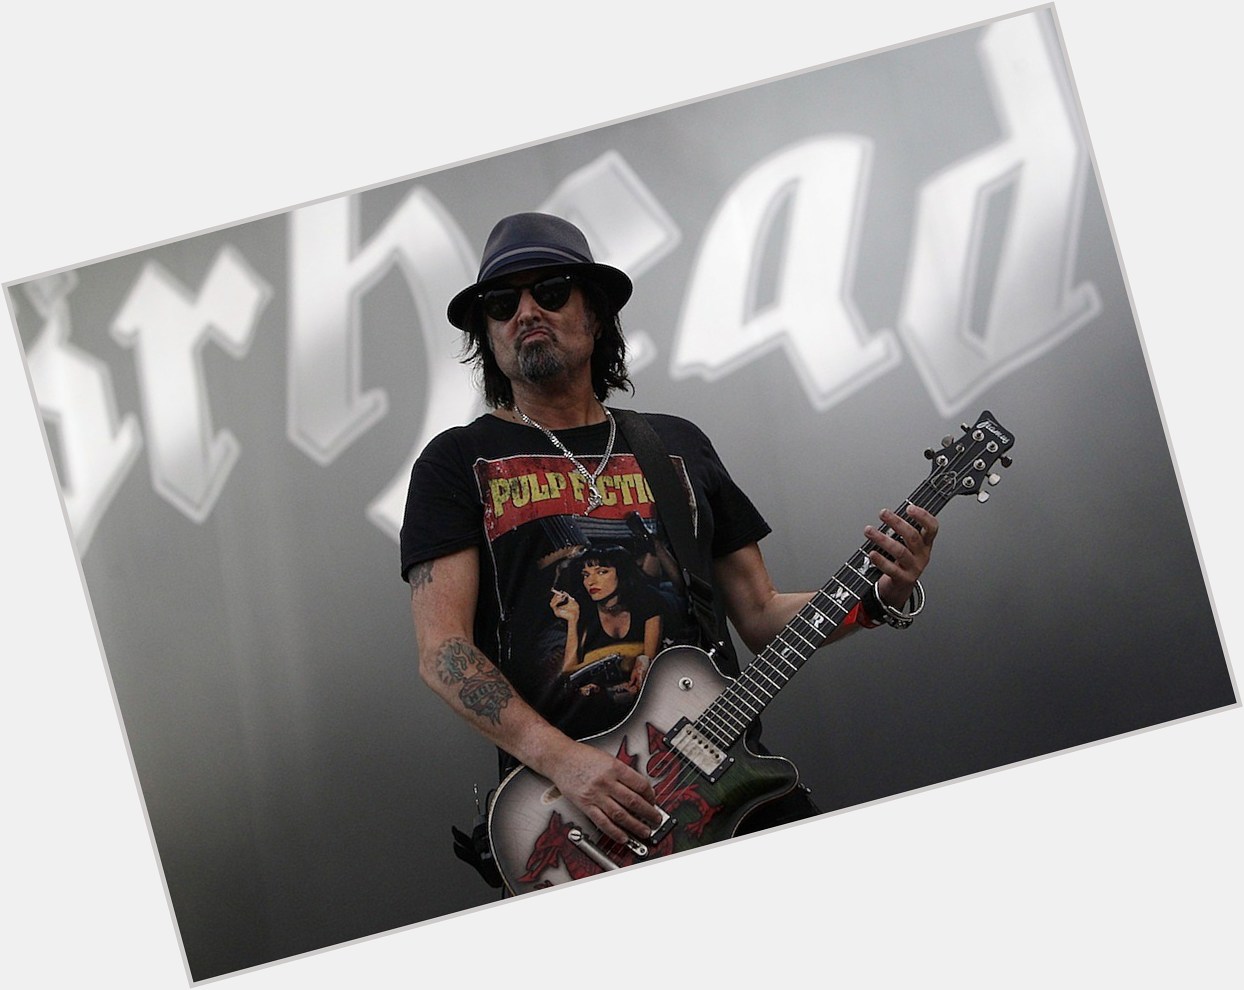 Happy birthday mr. Phil Campbell
May 7, 1961 